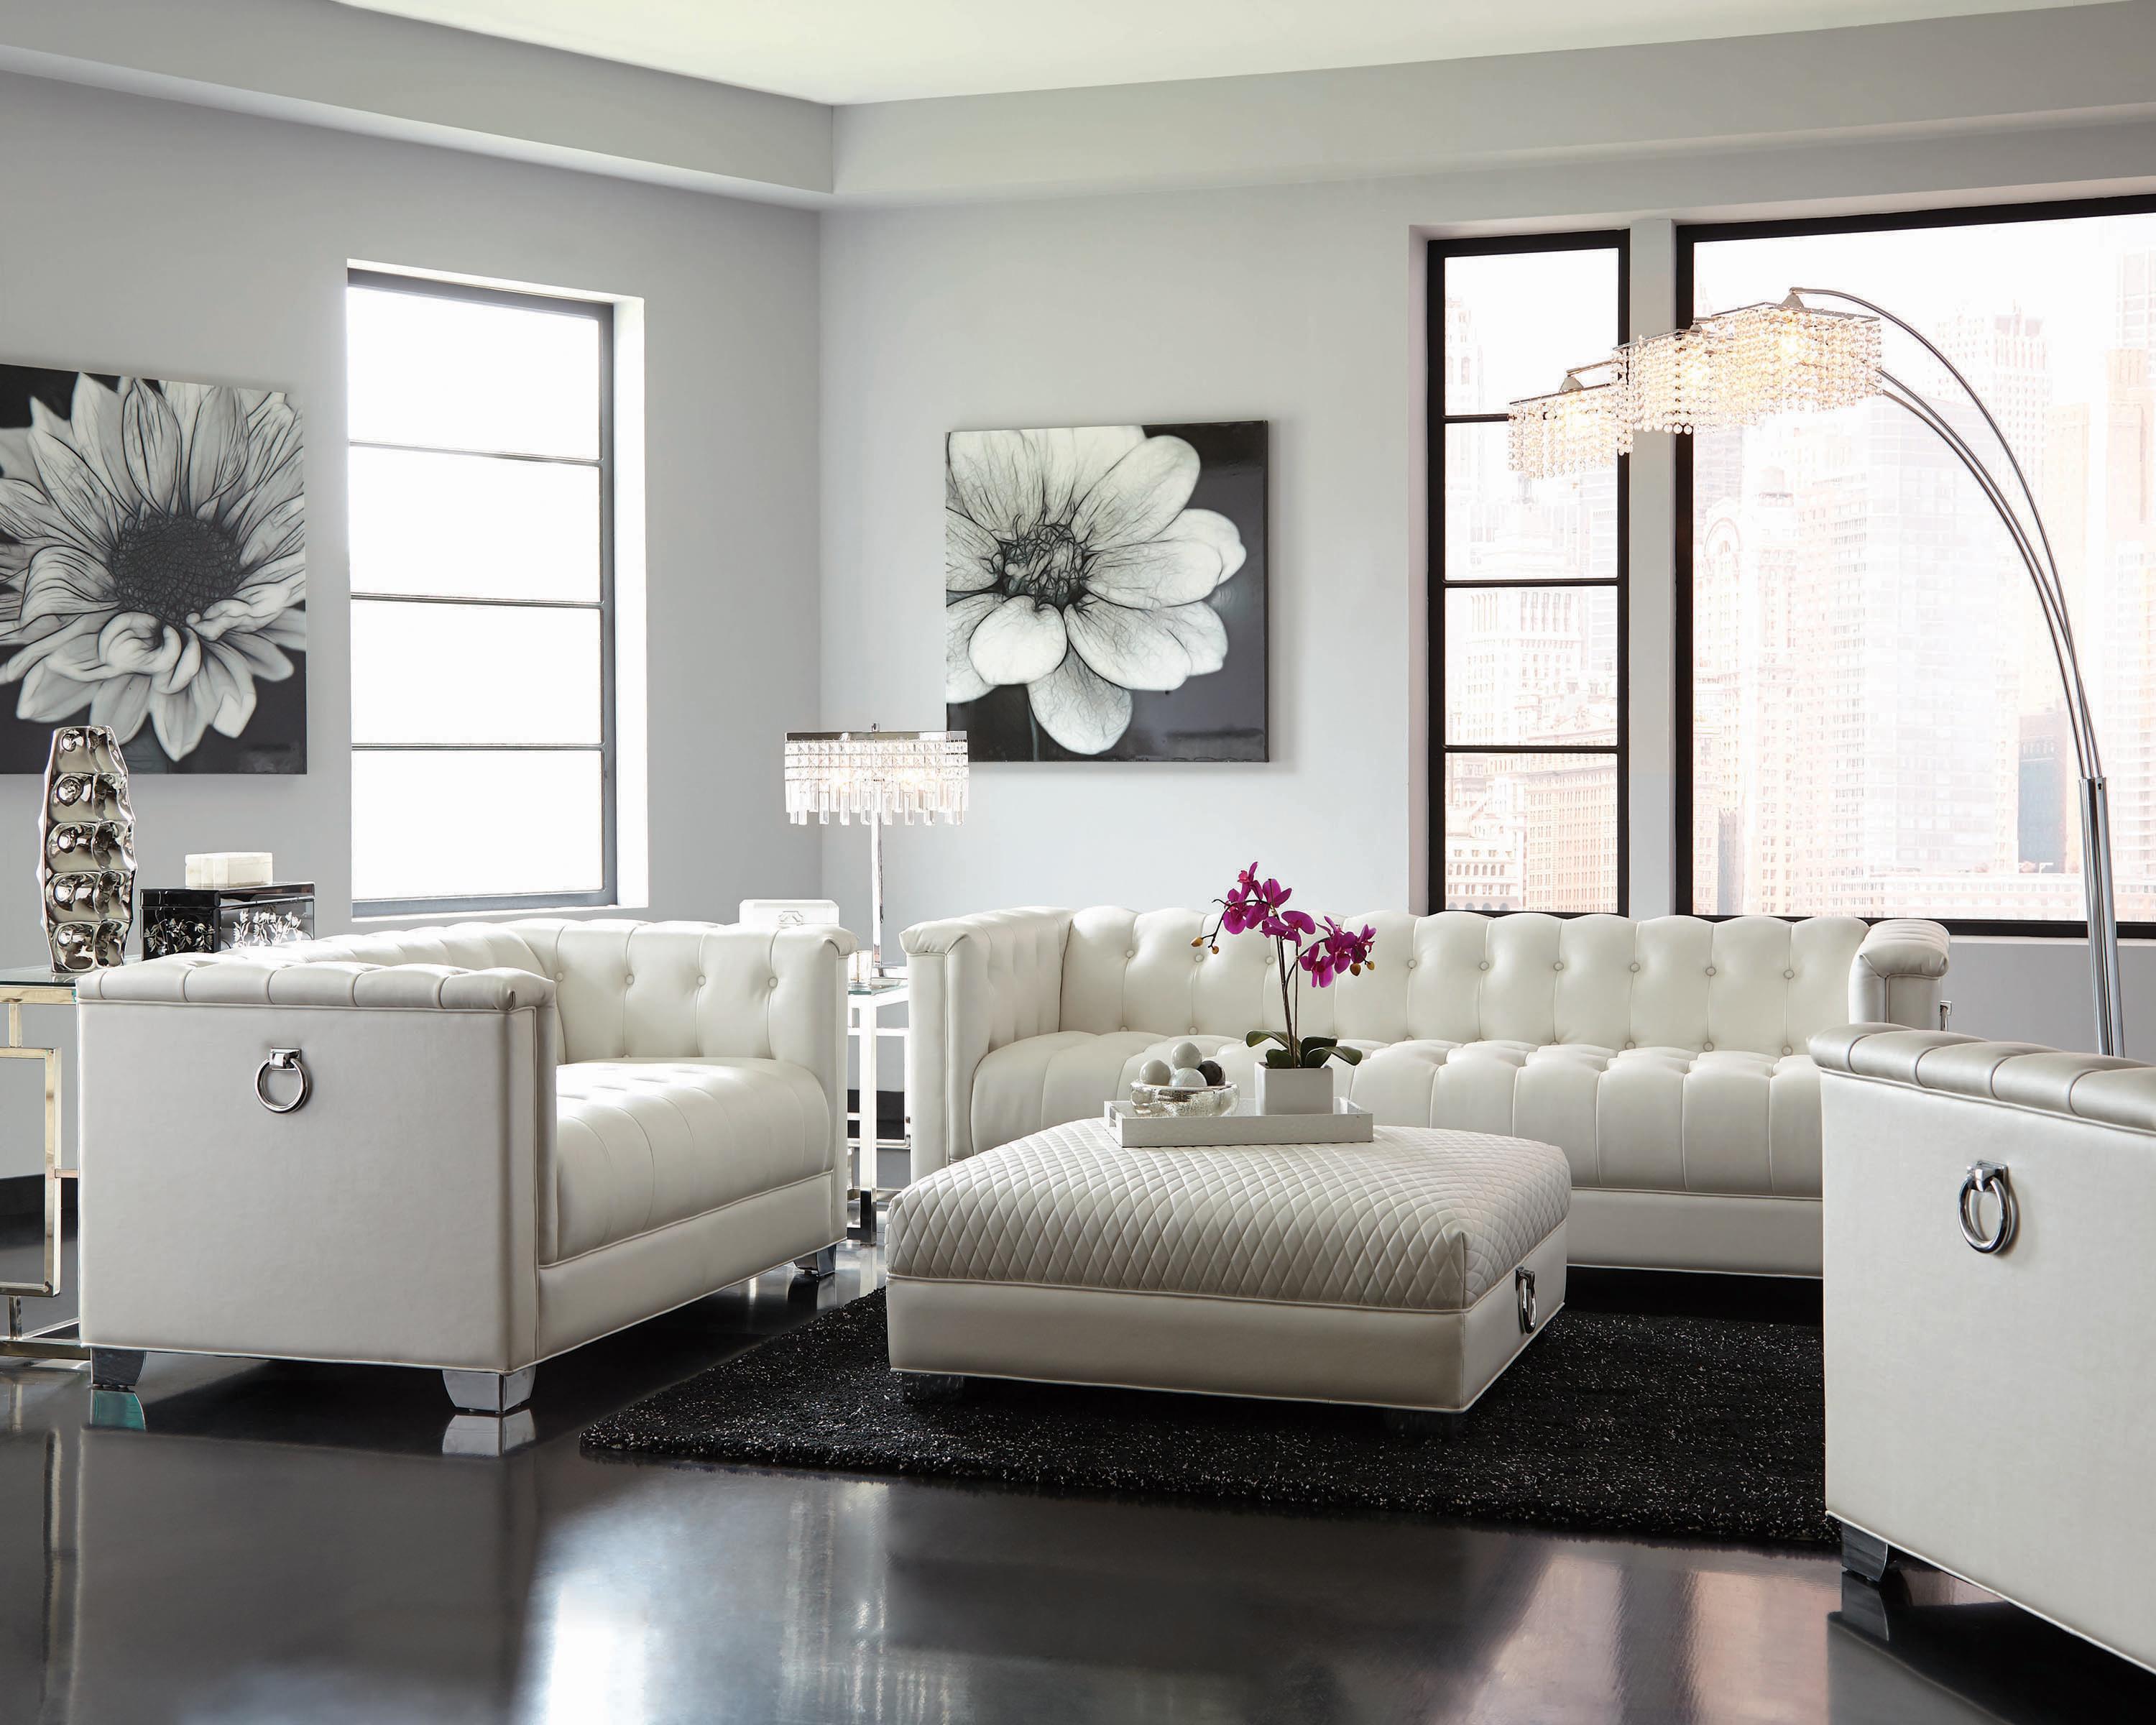 Contemporary Living Room Set 505391-S4 Chaviano 505391-S4 in Pearl White Leatherette